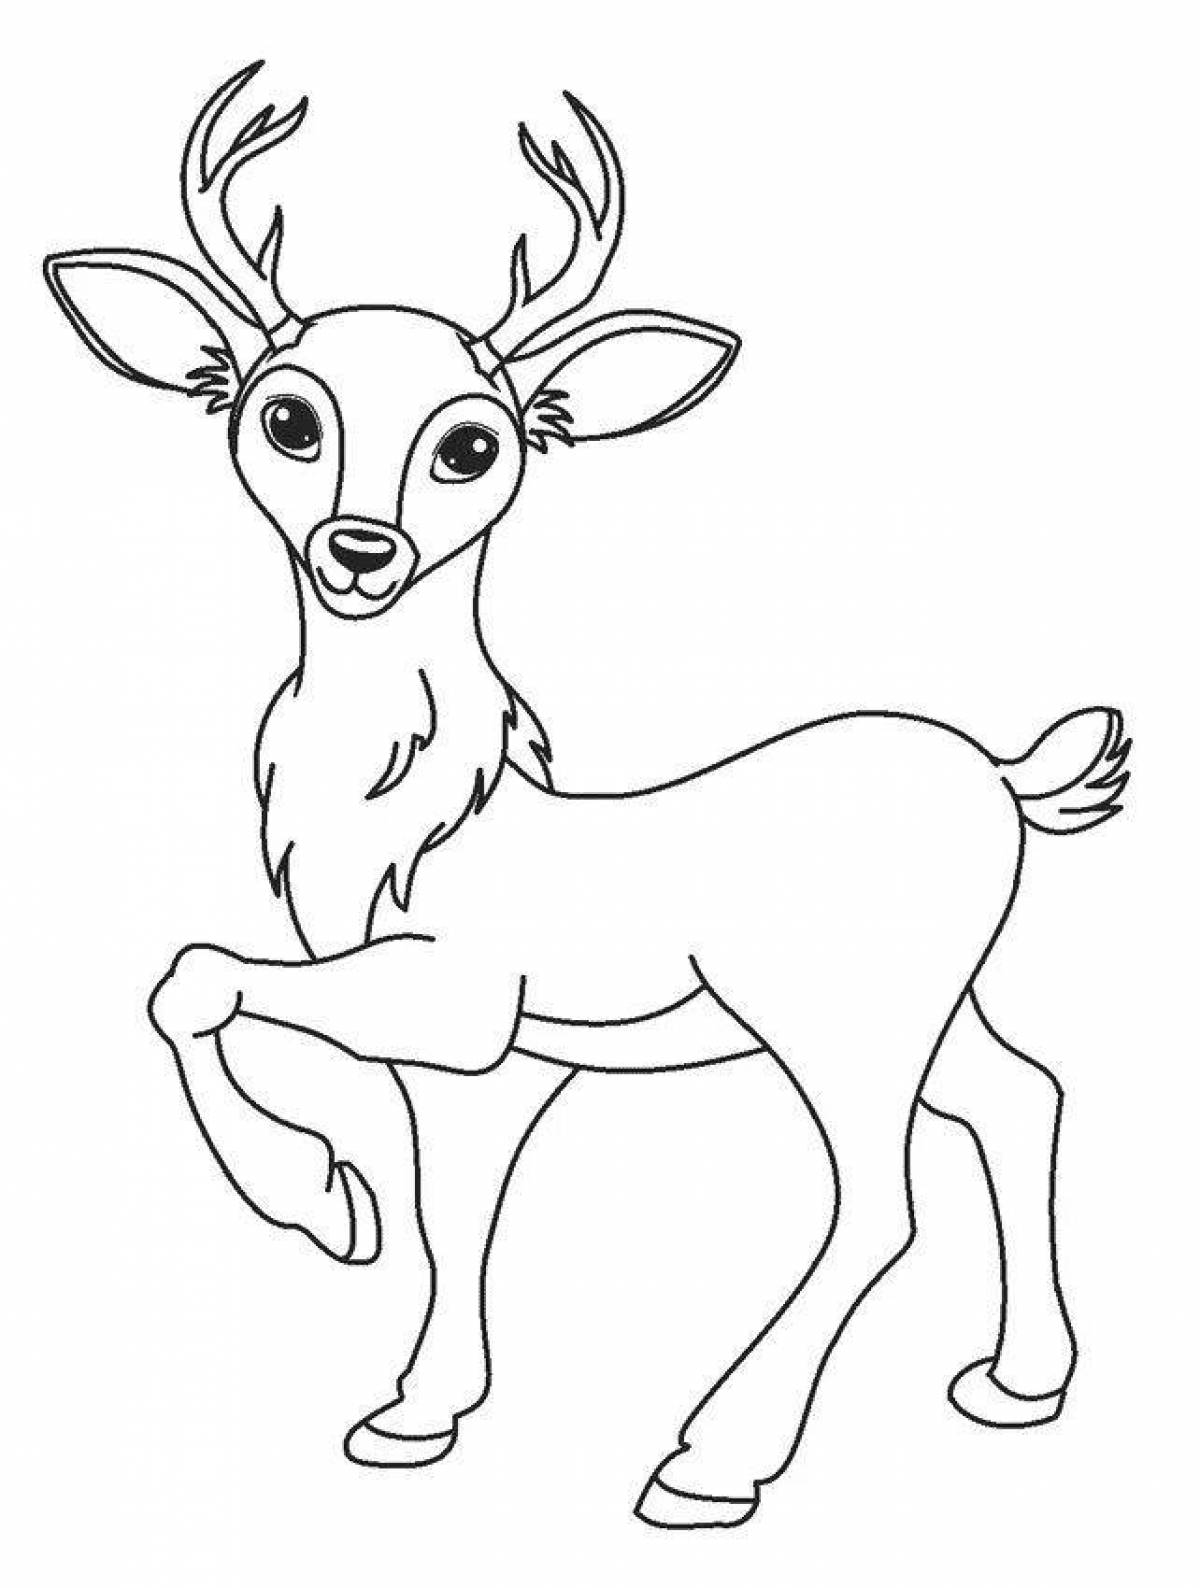 Color-bright silver hoof coloring page for preschoolers